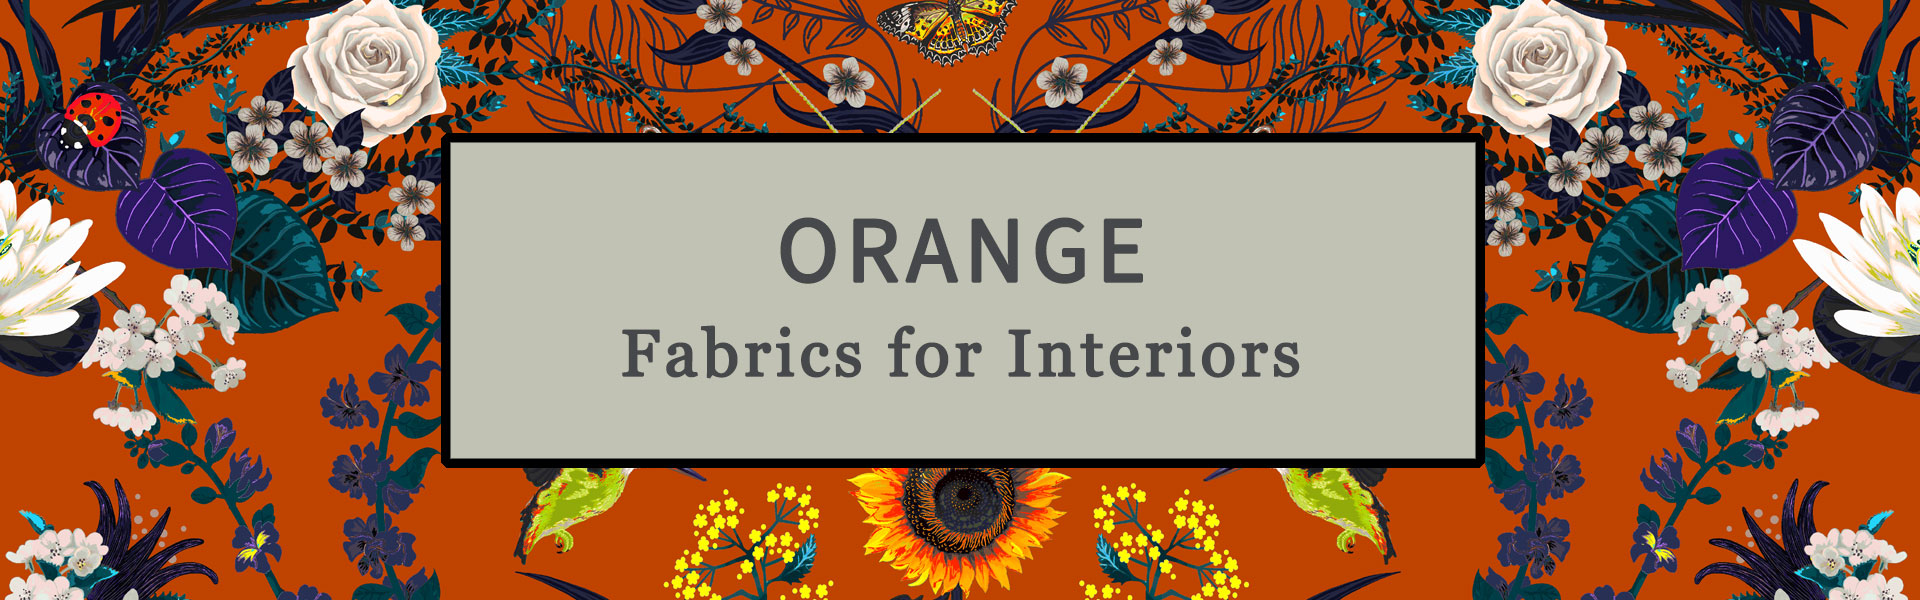 Orange Fabric for Interiors, Upholstery, Curtains and Soft Furnishings by Designer, Becca Who